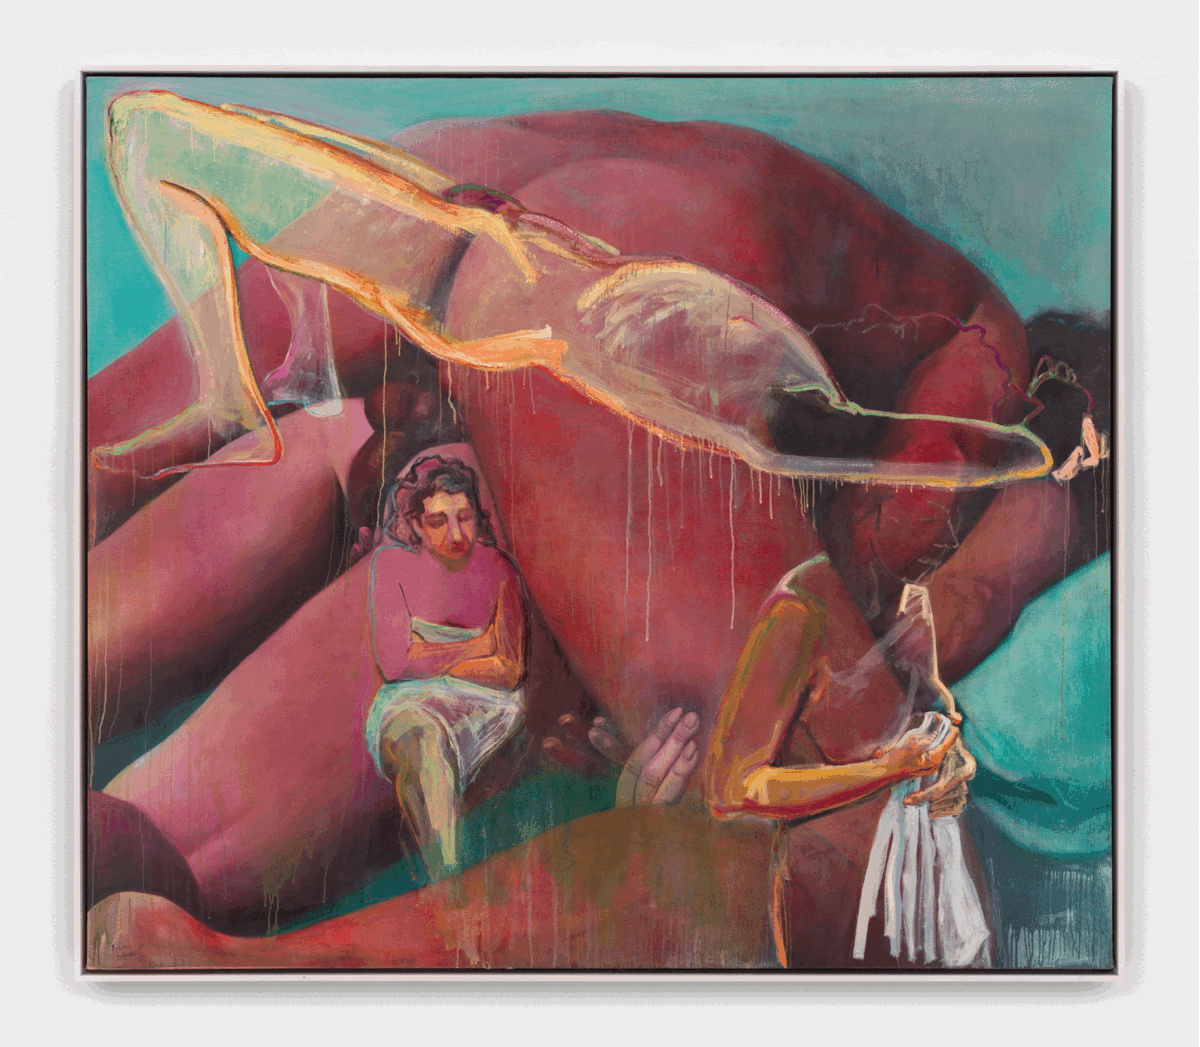 Joan Semmel, Bottoms Up, 1973/1992. Oil on canvas. 68 x 78 in (172.72 x 198.12 cm); Steve Locke, the confidante, 2013. Oil and acrylic on panel. 17 7/8 x 17 7/8 x 1 in (45.4 x 45.4 x 2.5 cm); Betty Parsons, No Squares, 1970. Oil on canvas. 36 x 50 in (91.44 x 127 cm)